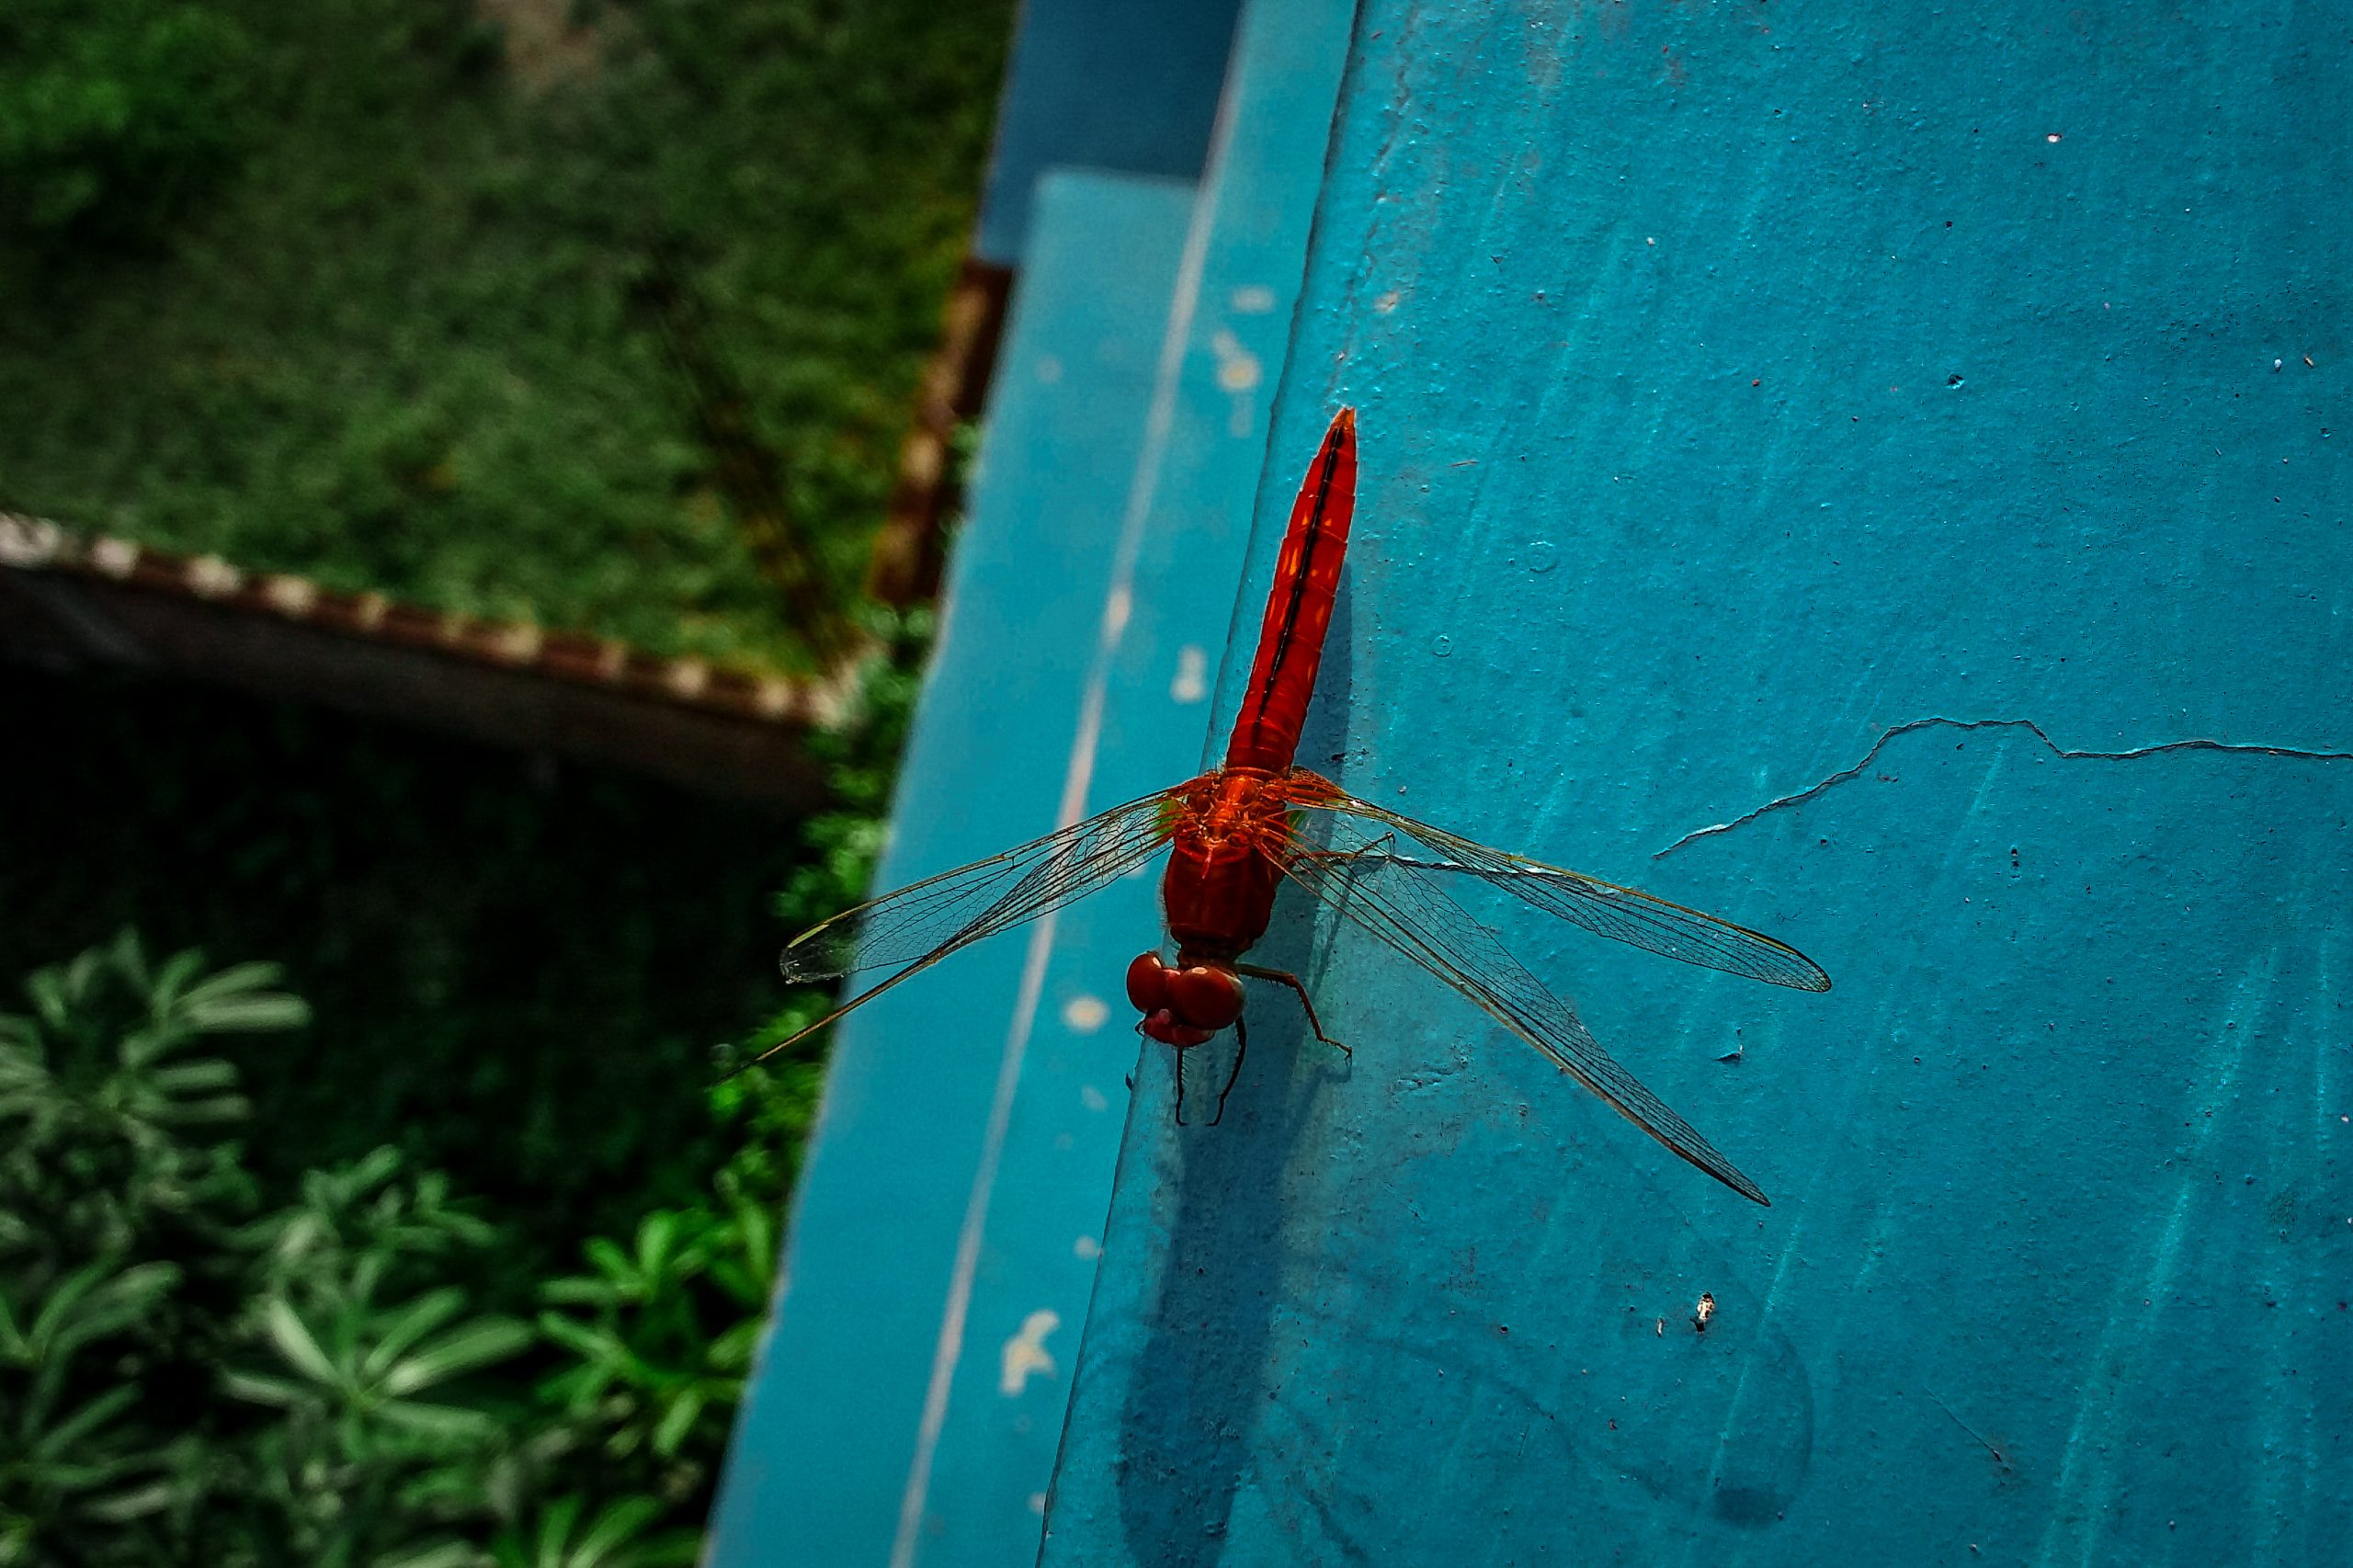 A dragonfly on a surface